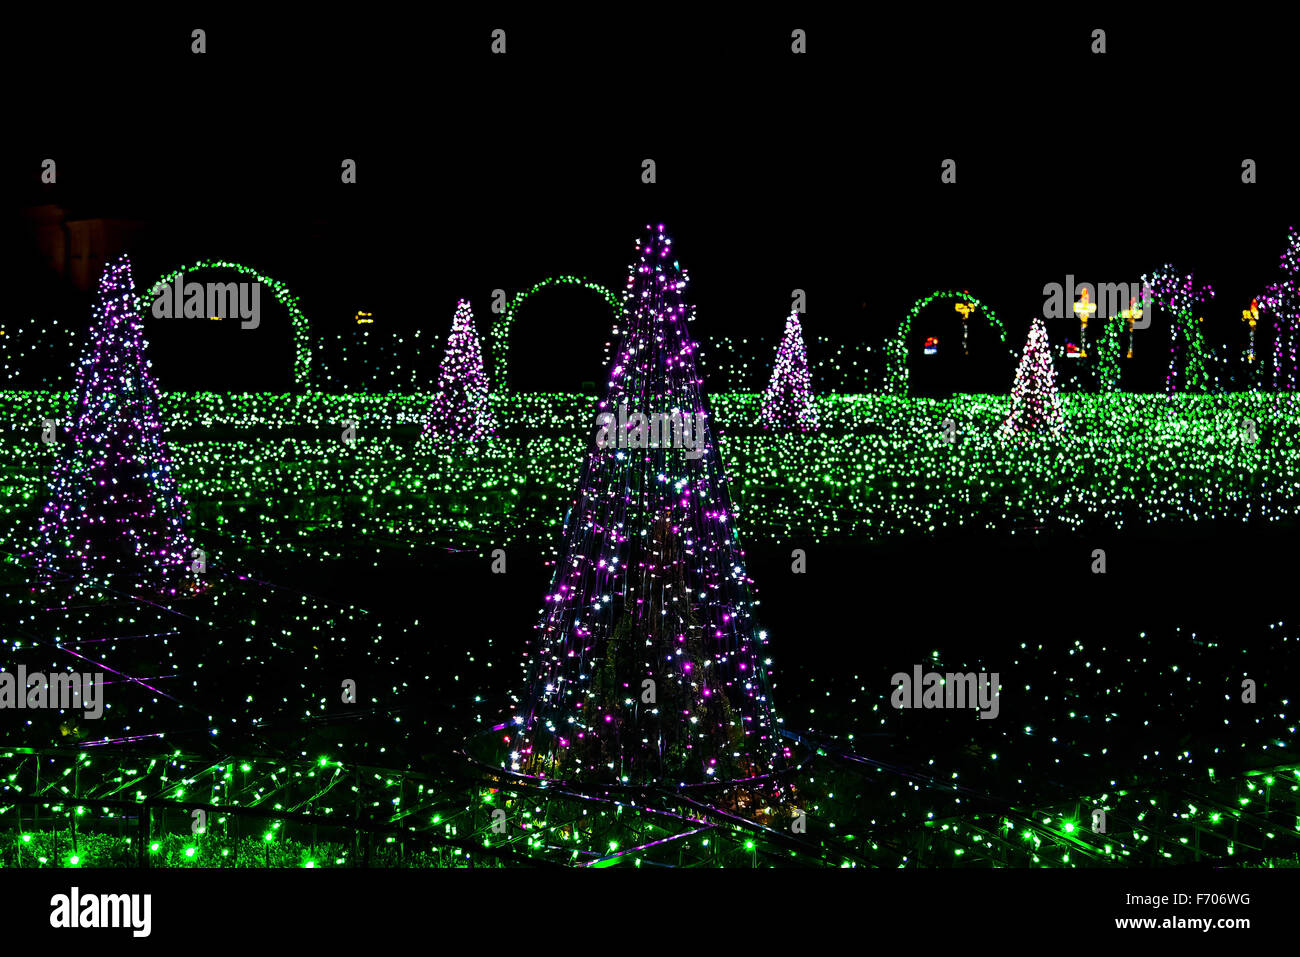 Fir-Trees and Grass Illuminated from Christmas Lamps in Garden Stock Photo